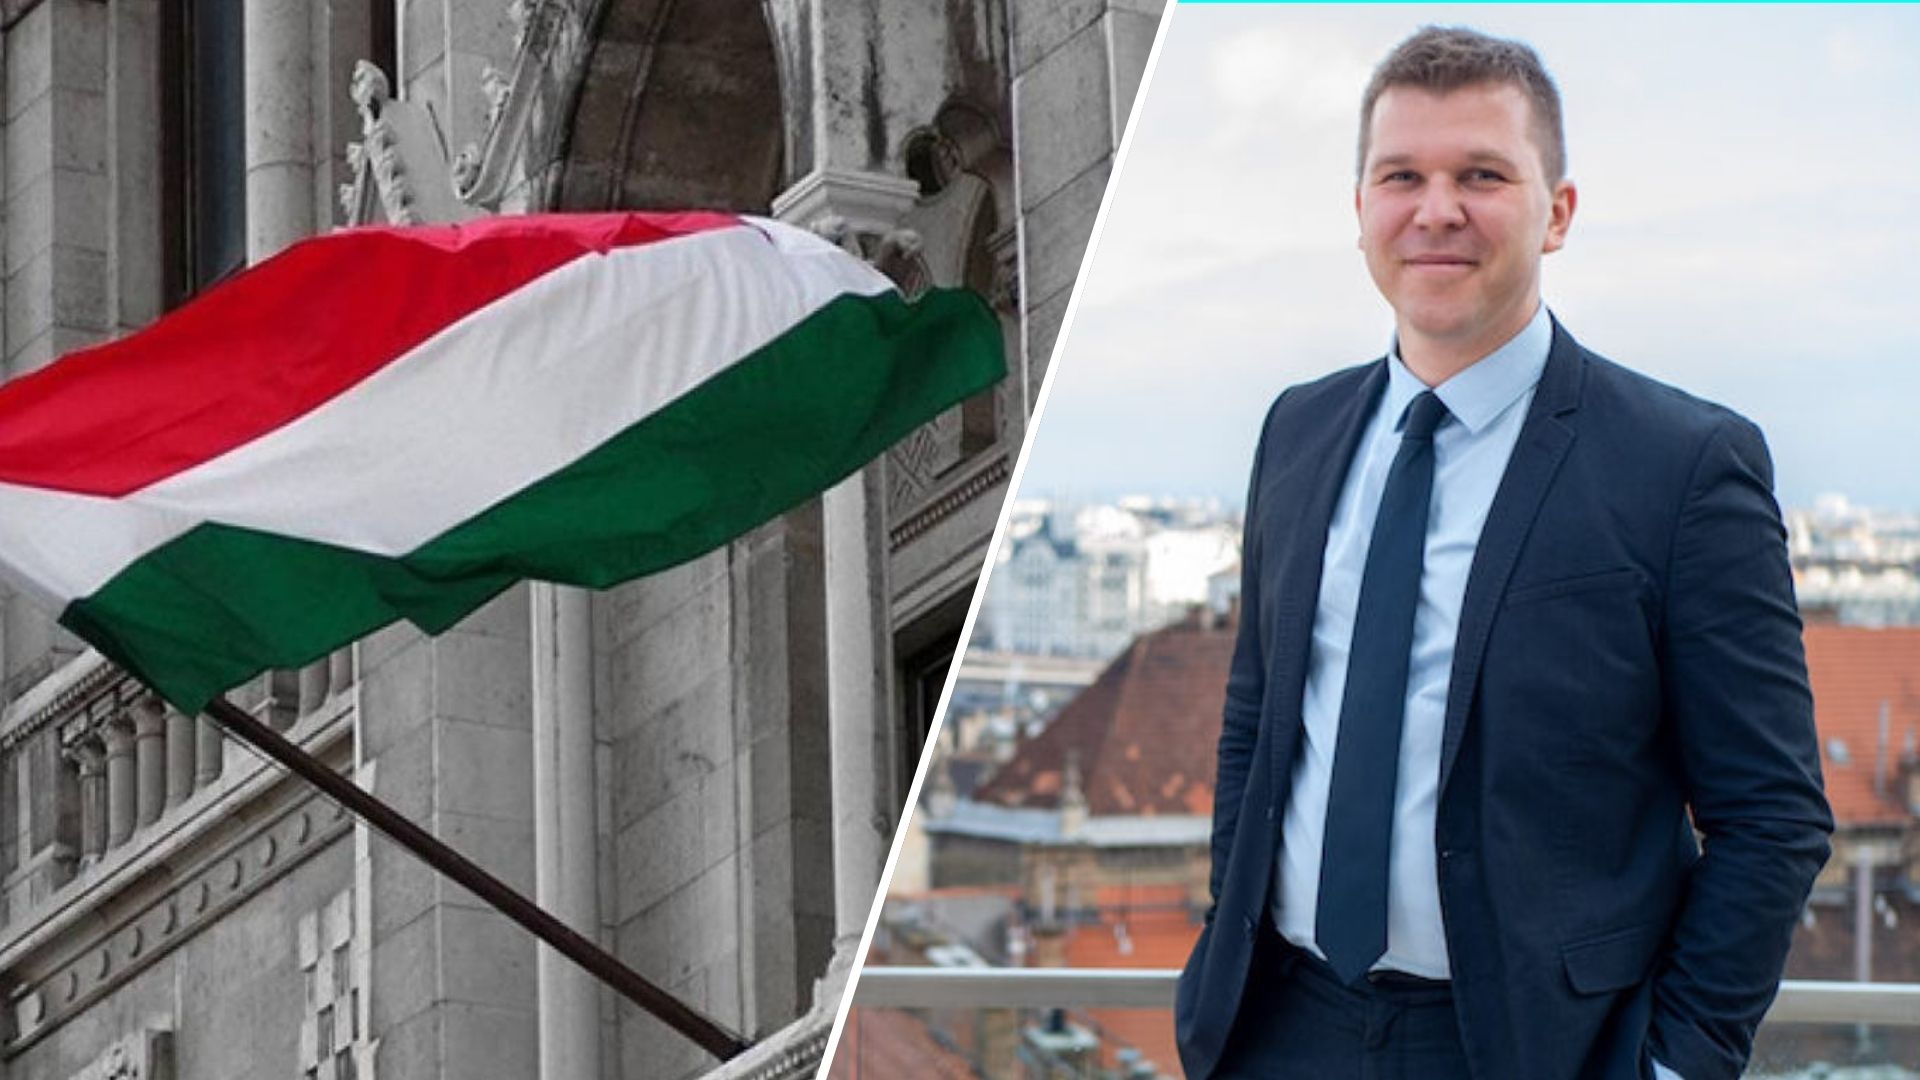 Anton Bendarzewski, Director of the Oeconomus Foundation for Economic Research, discussed a number of issues related to Hungarian-Ukrainian relations, the impact of American policy on the situation in Ukraine and the possibility of a meeting between Viktor Orbán and Volodymyr Zelenskyy.